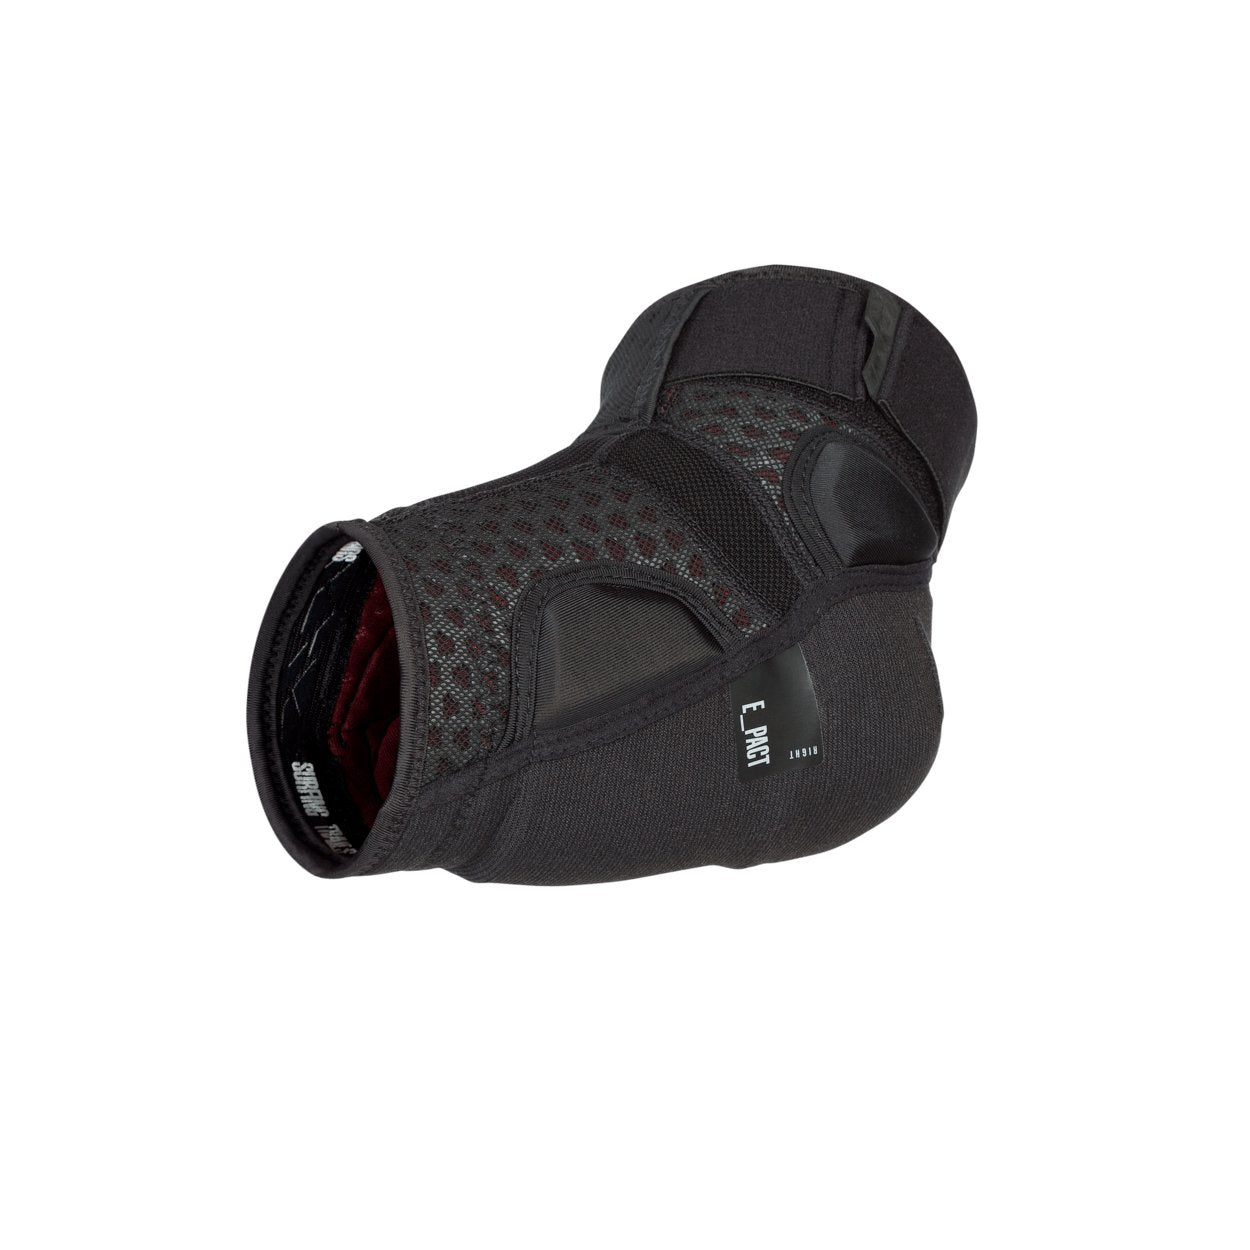 ION MTB Elbow Pads E-Pact 2024 - Worthing Watersports - 9008415761876 - Body Armor - ION Bike